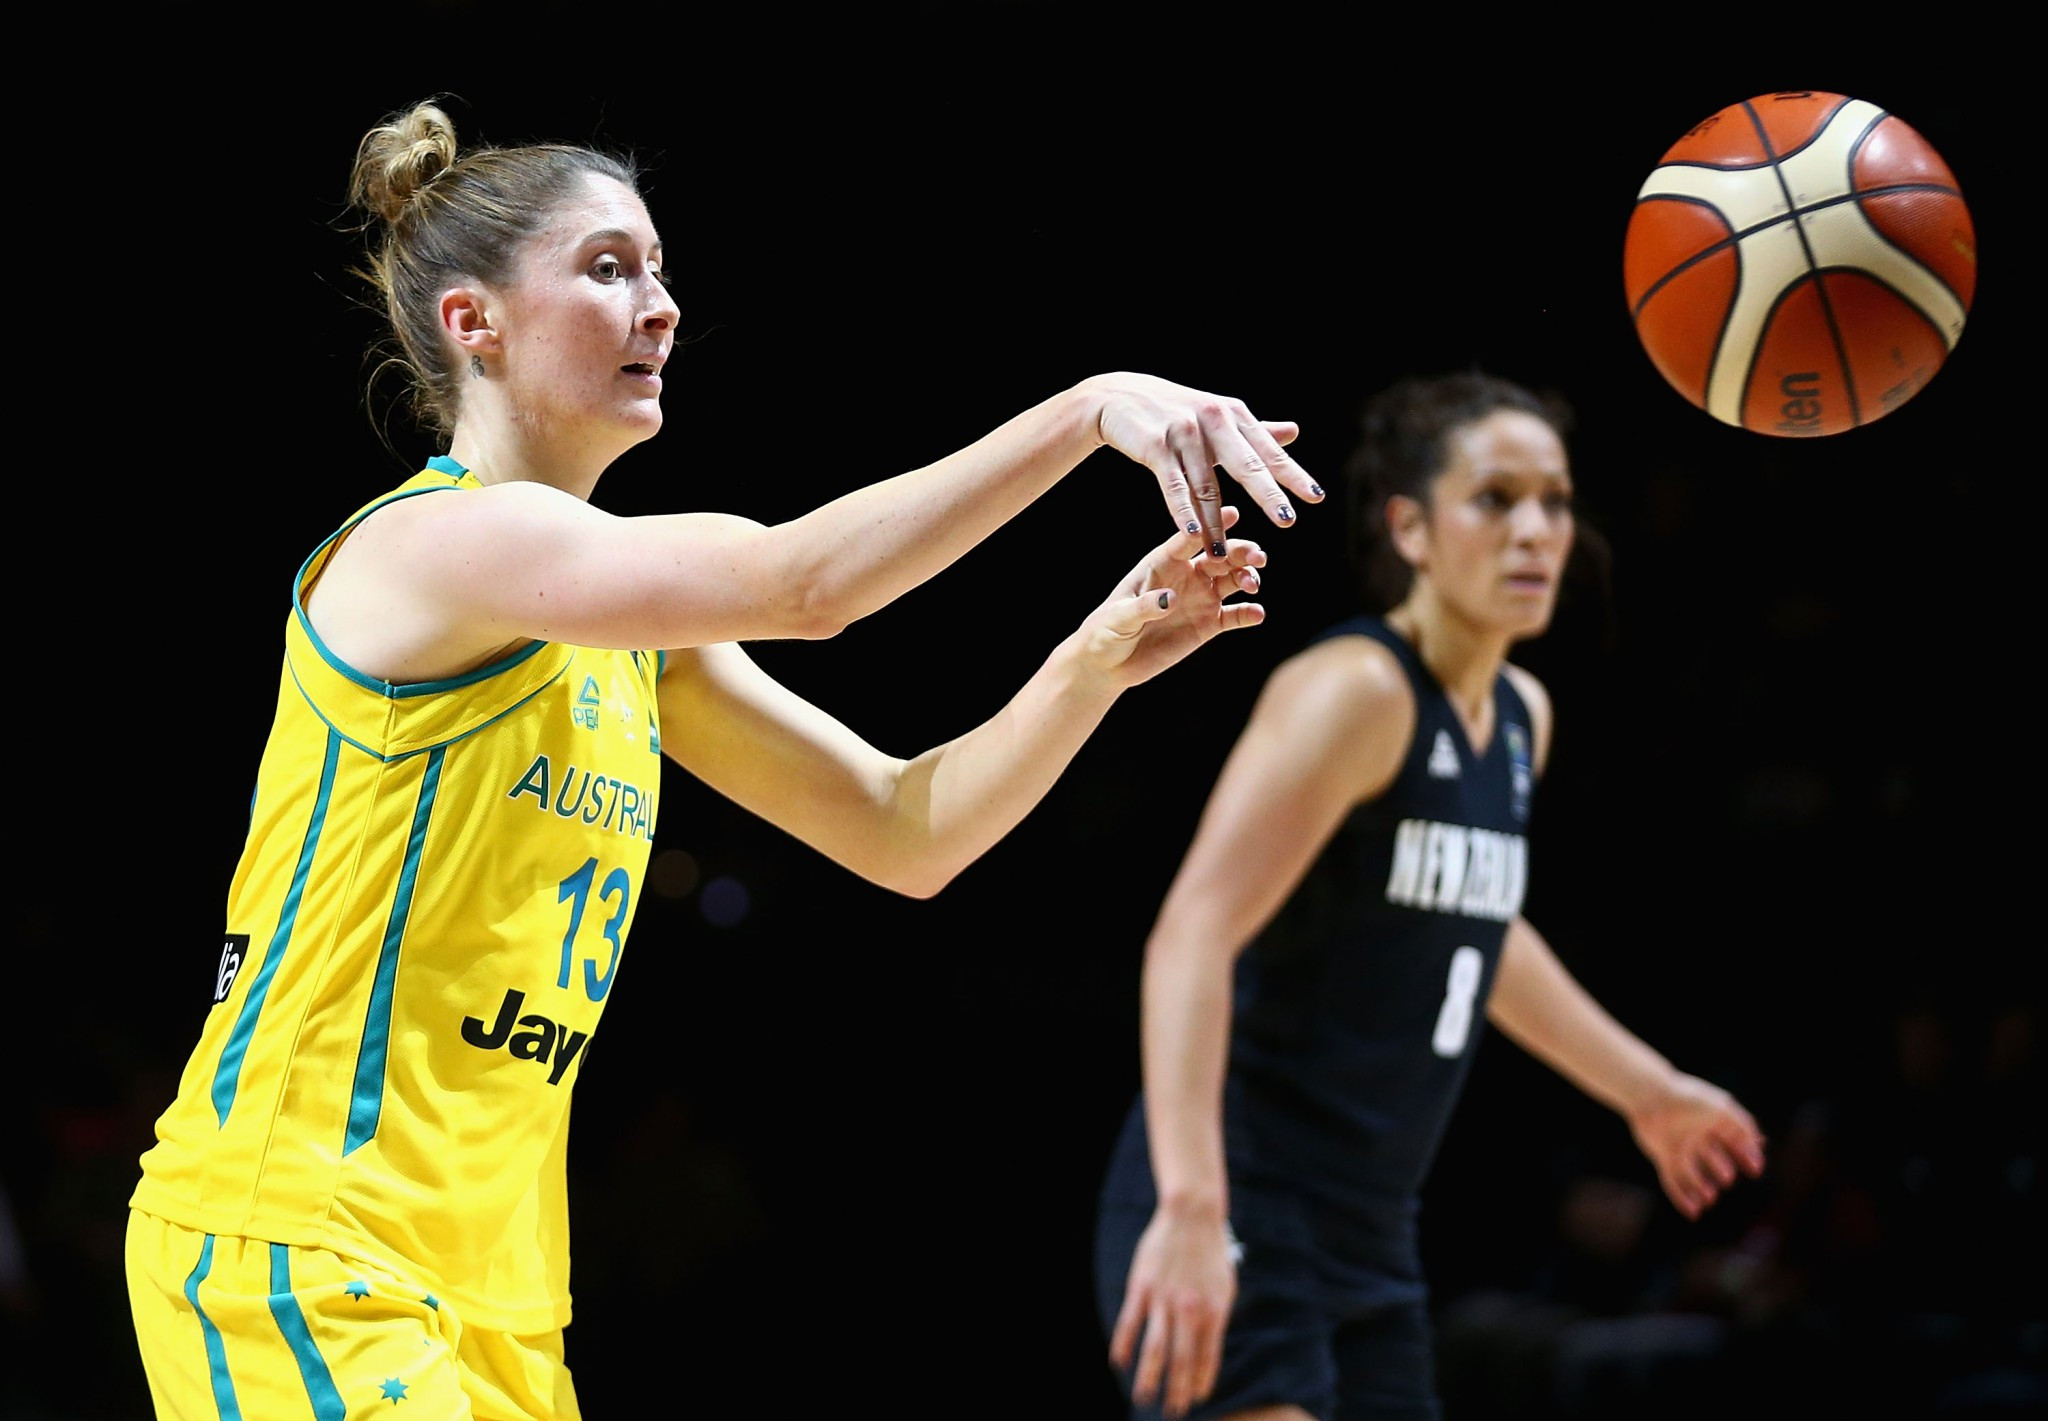 Australia will hope for basketball success in front of a home crowd ©Getty Images